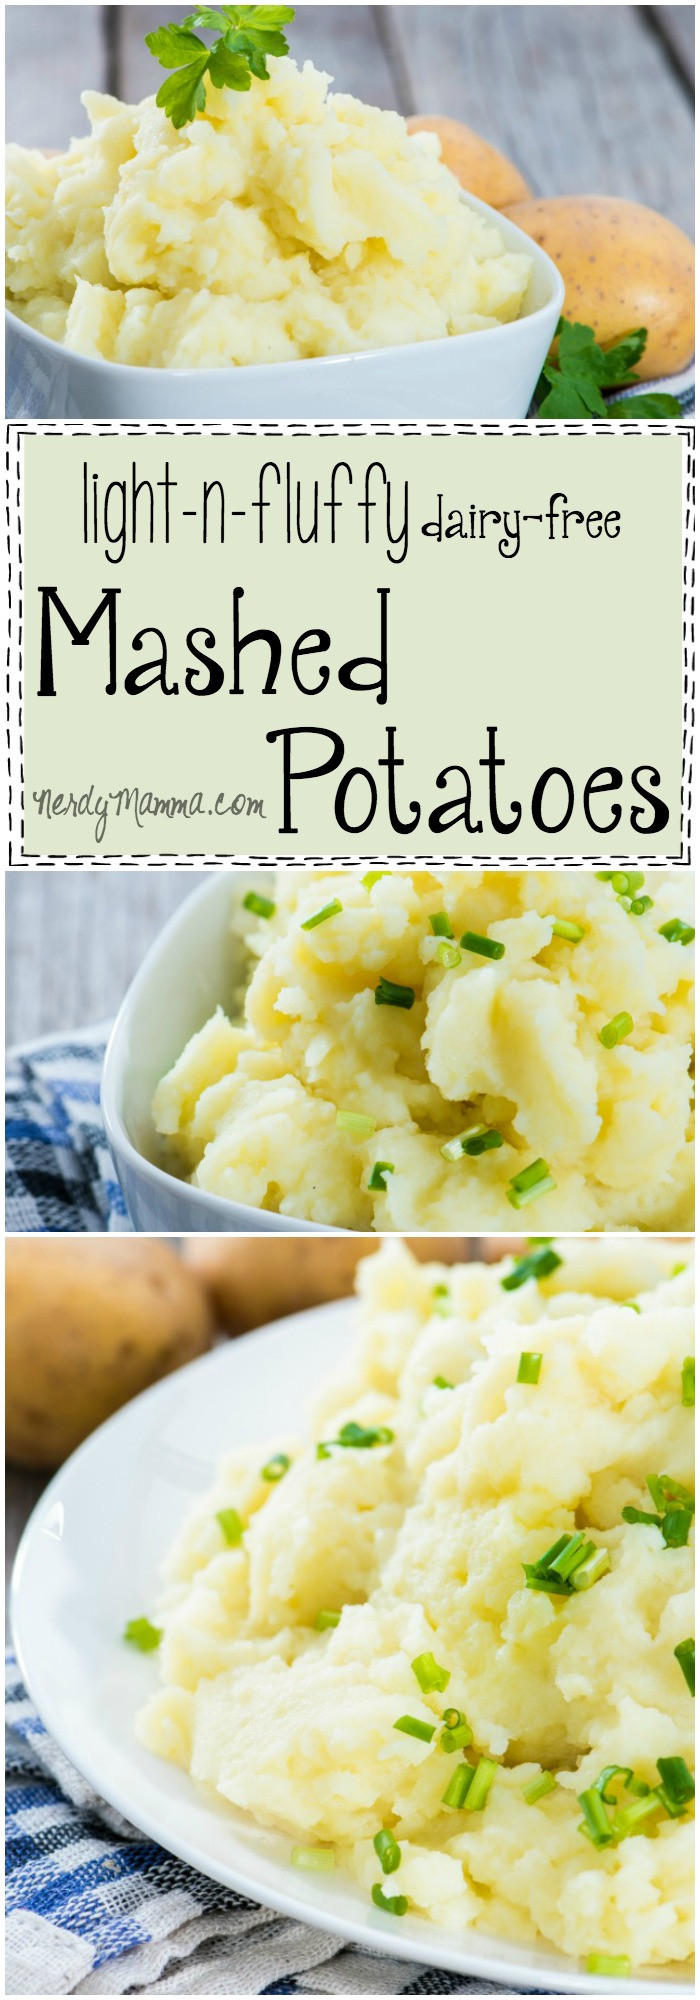 Dairy Free Mashed Potatoes
 Light & Fluffy Dairy Free Mashed Potatoes Nerdy Mamma